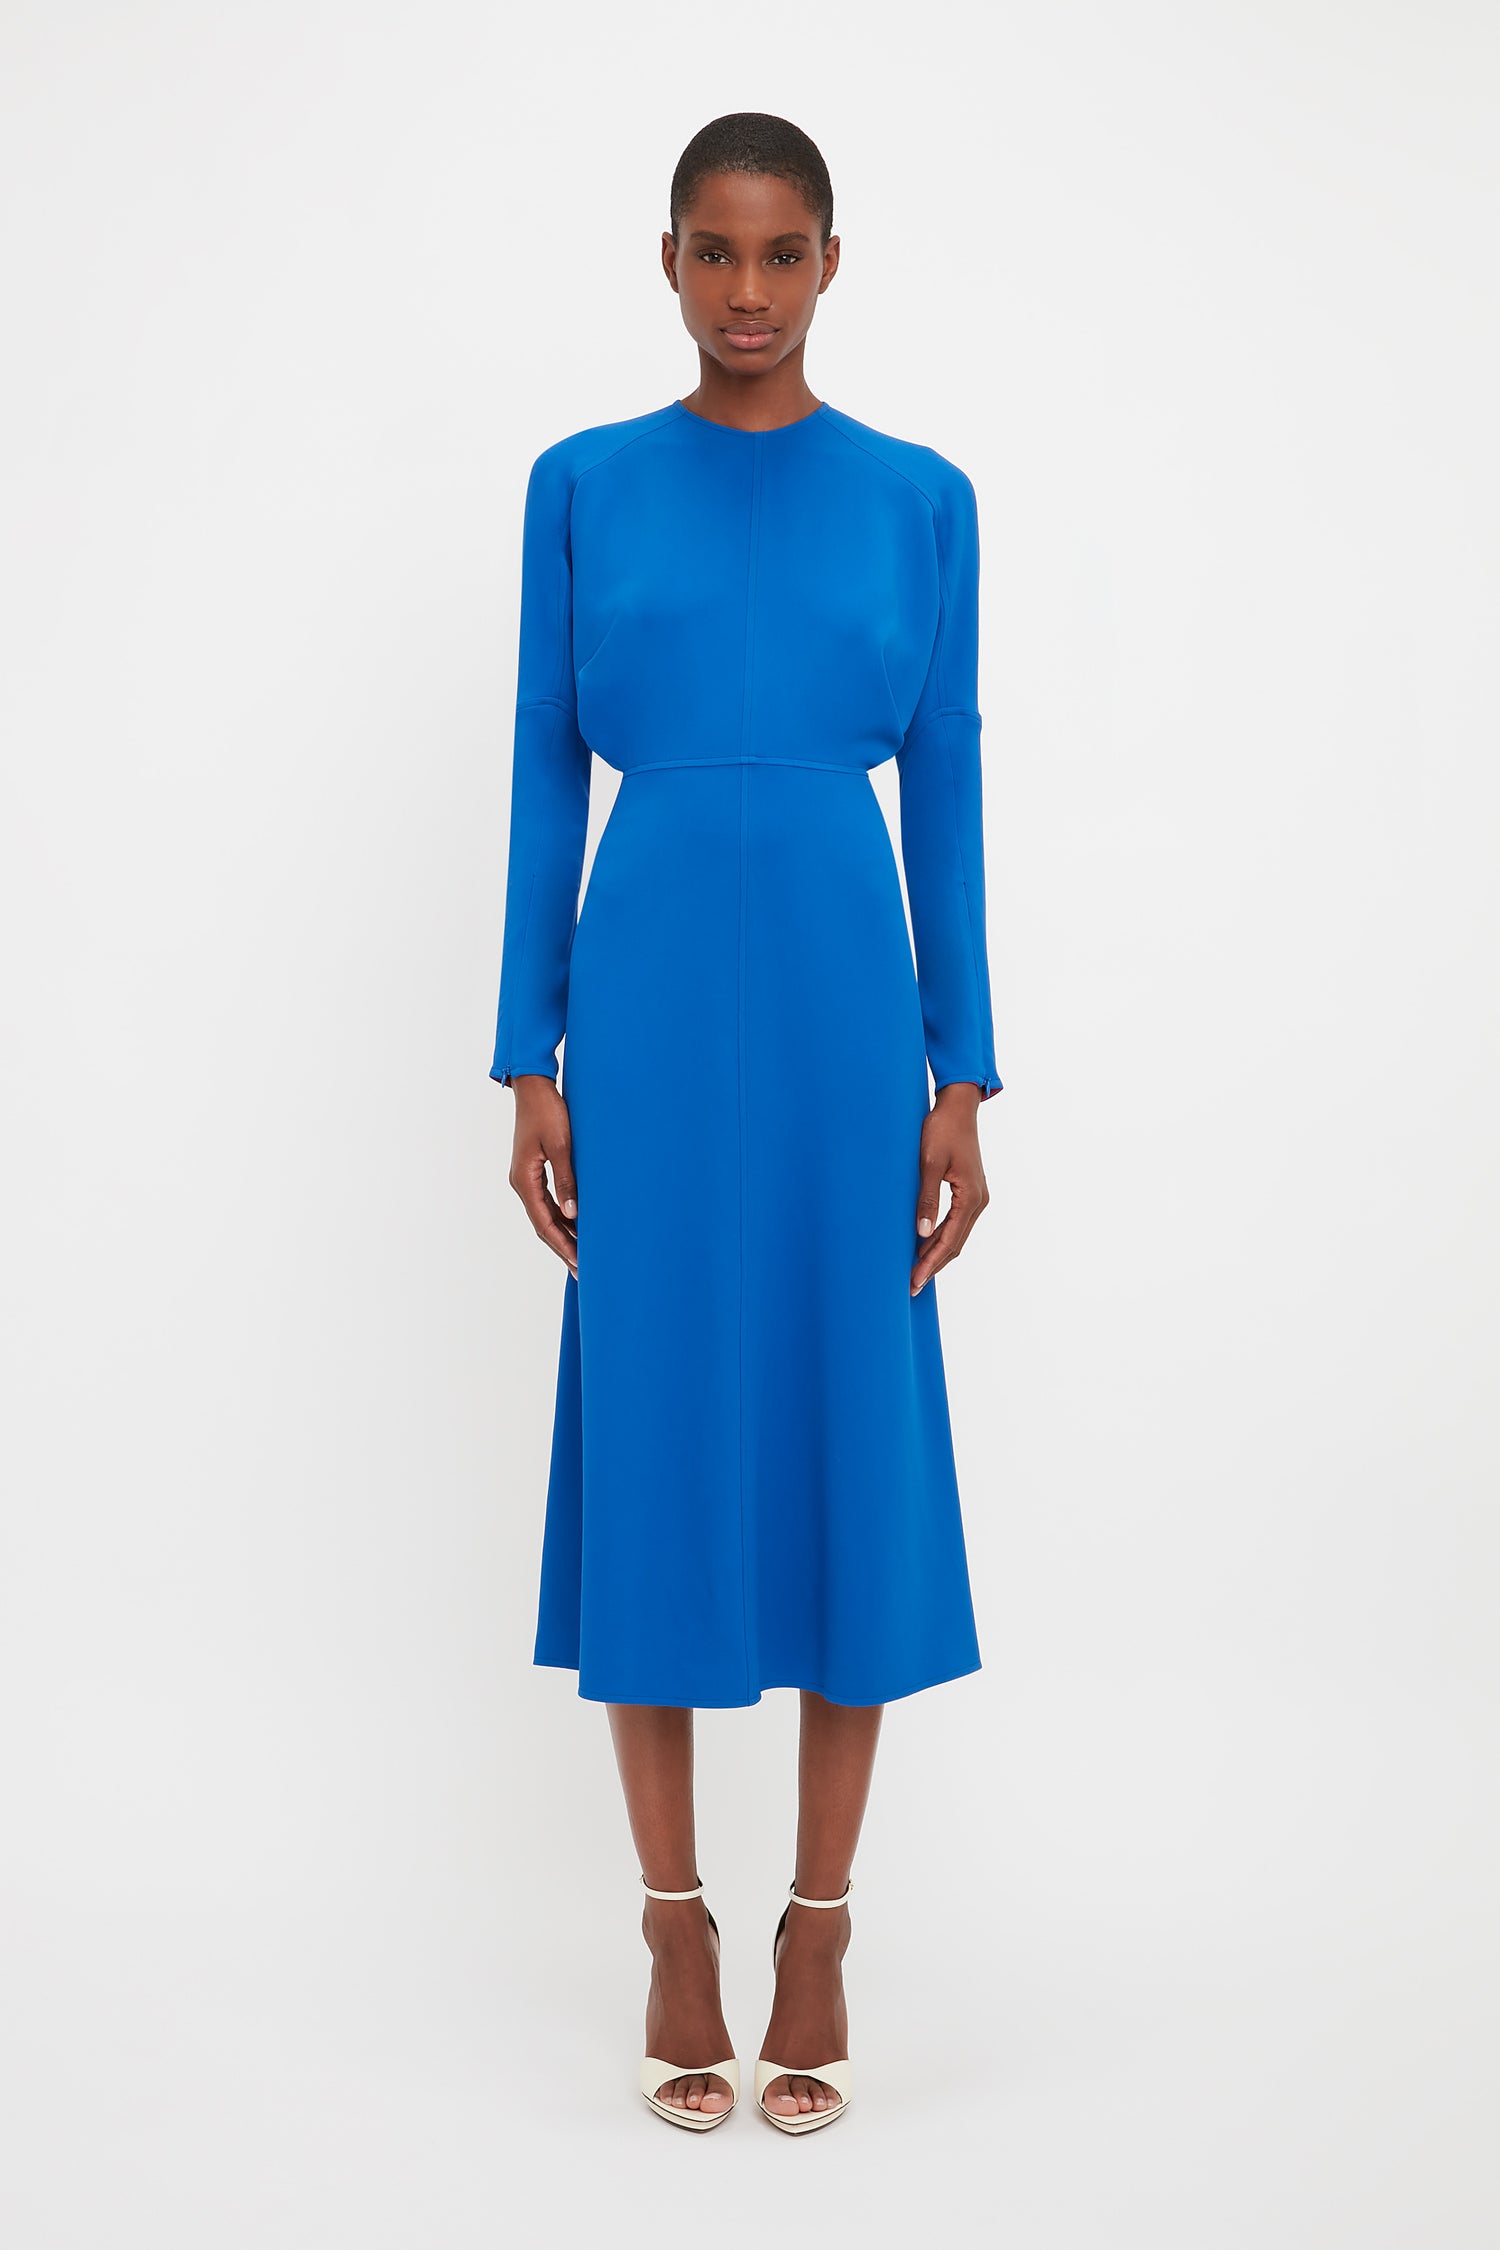 The Dolman midi dress comes in a bright blue colour and midi length. Model wear this classic Victoria Beckham style has long sleeves and a round neckline. 